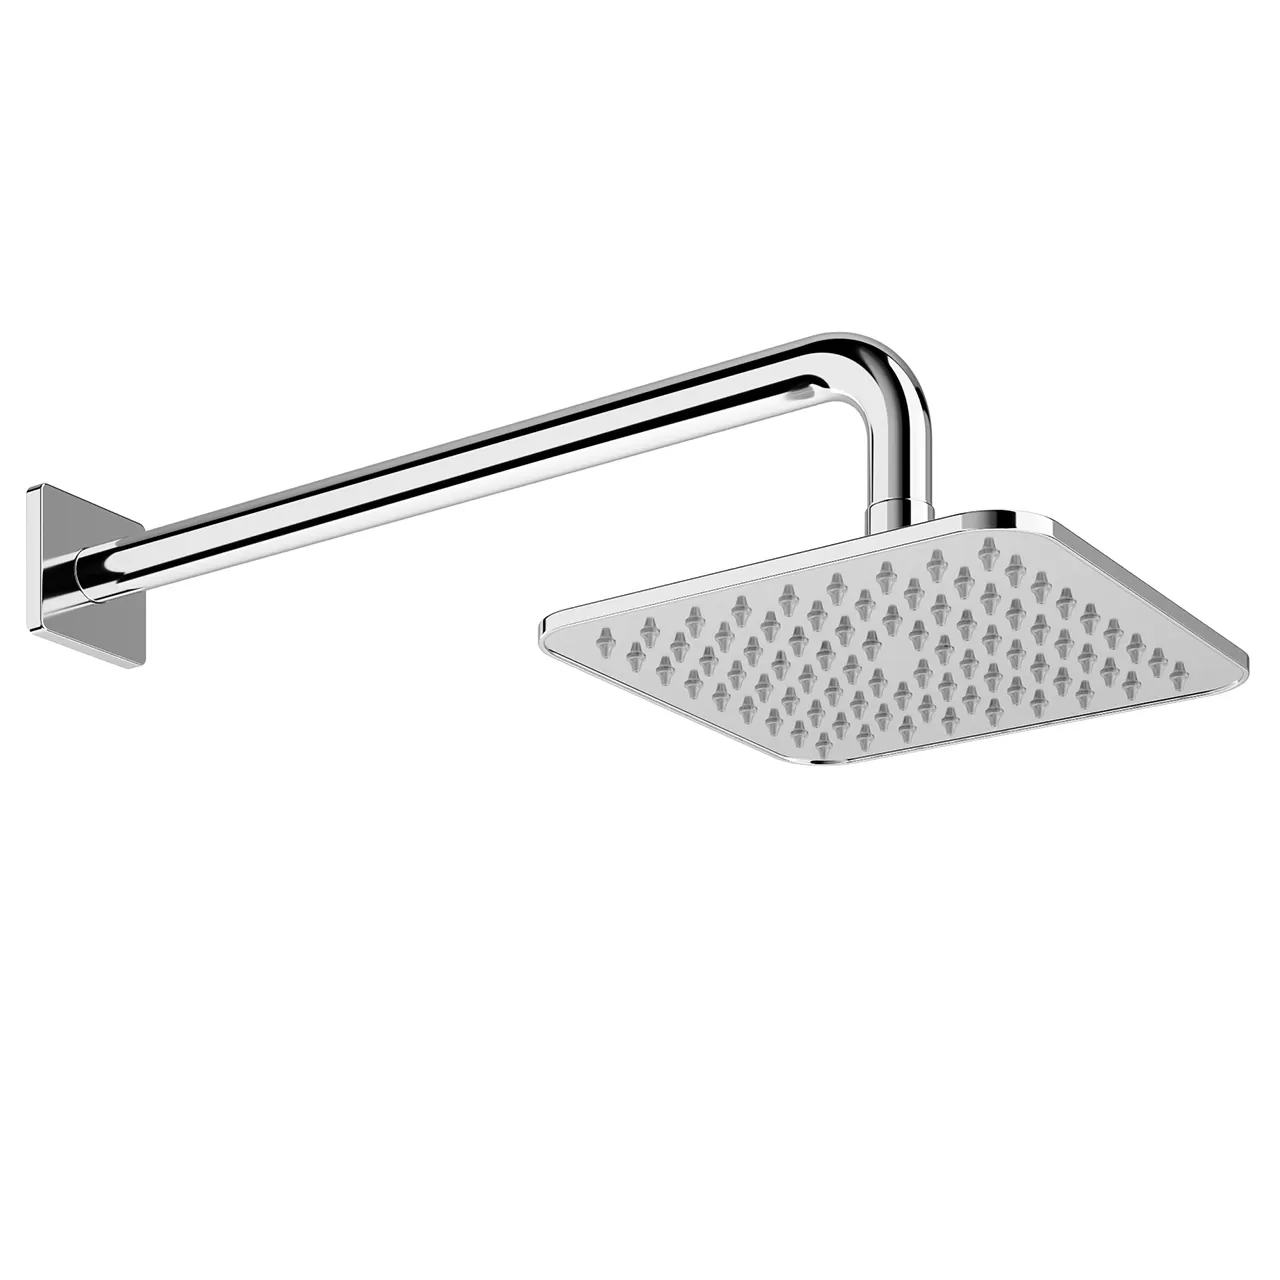 Bathroom – wall-square-rain-shower-head-202-and-242-mm-by-laufen